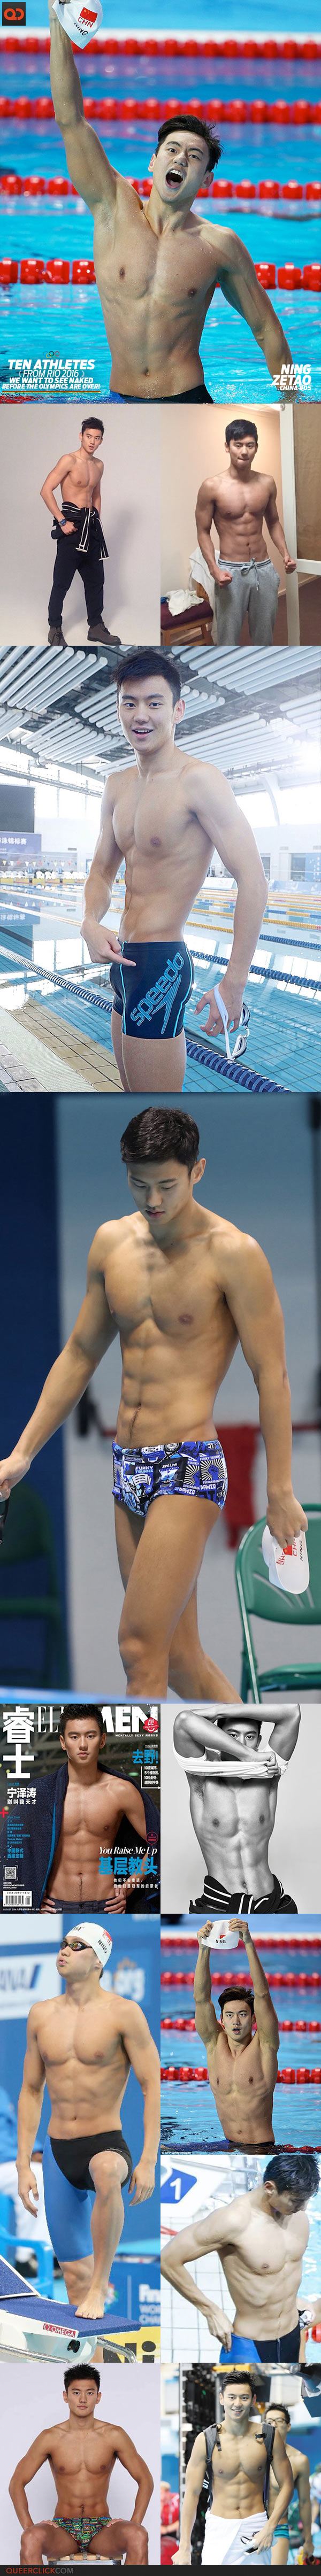 Ten Athletes From Rio 2016 That We Want To See Naked Before The Olympics Are Over! - Ning Zetao